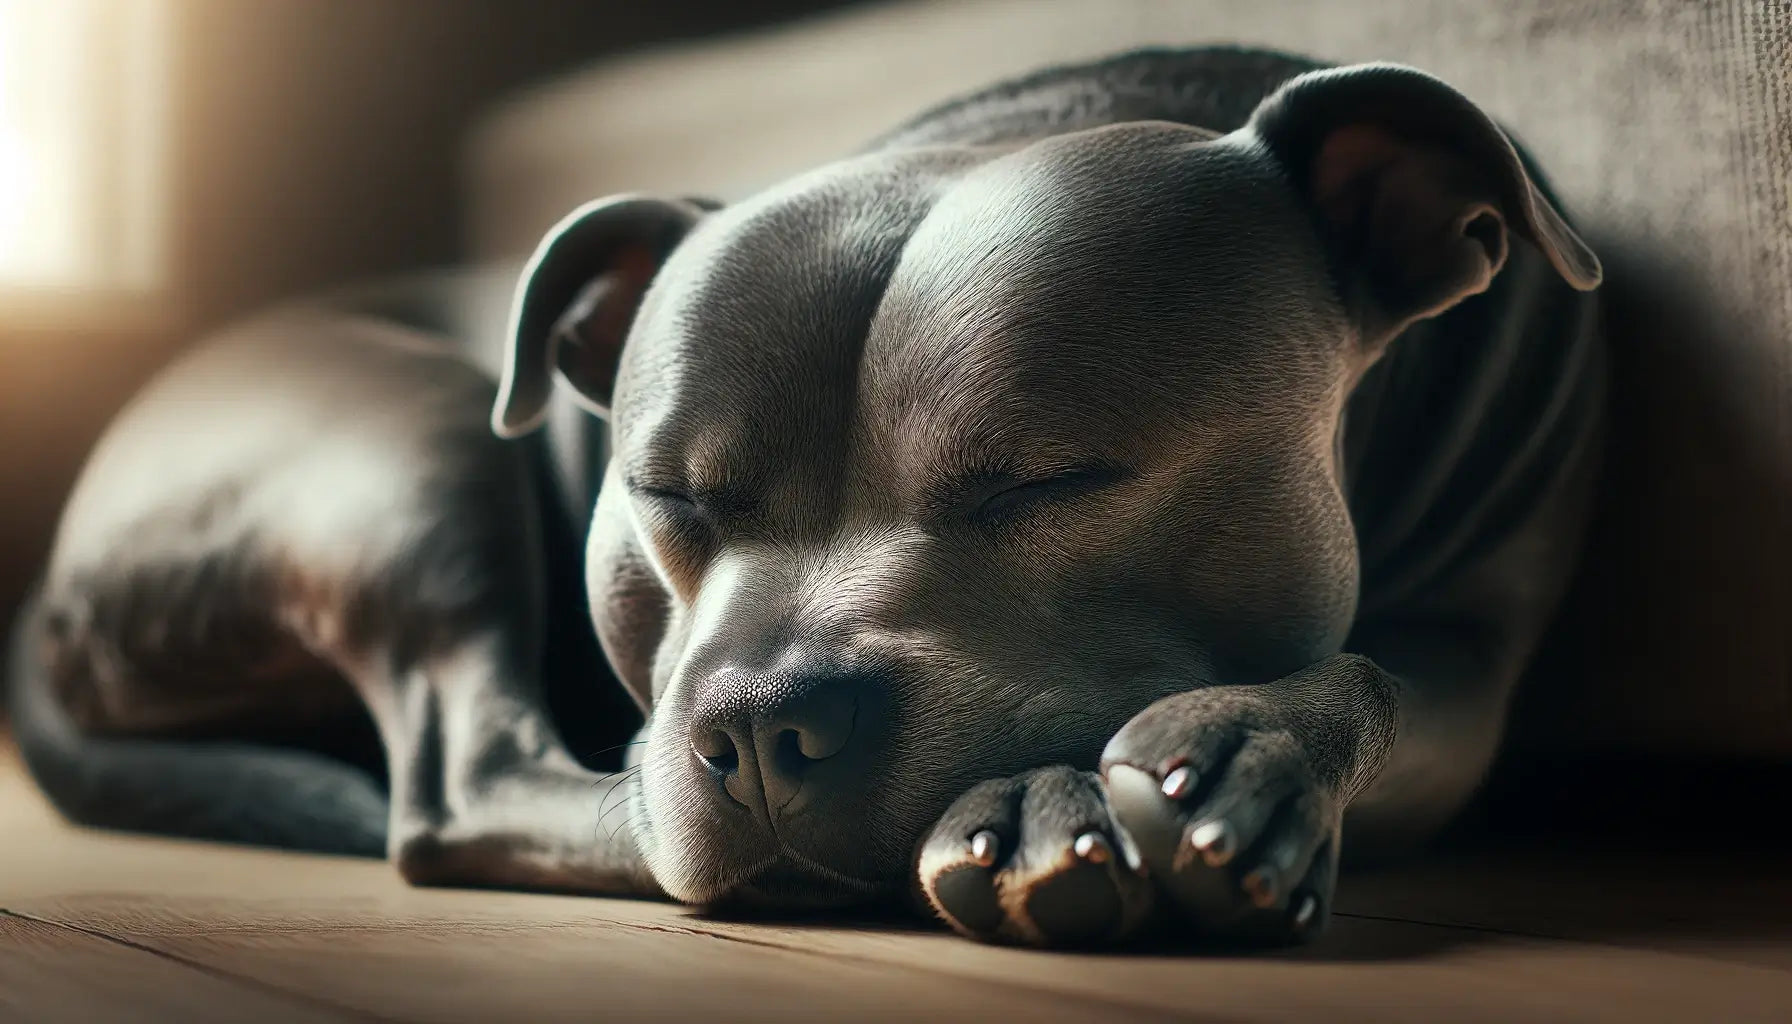 Blue Staffy sleeping curled up with its head resting on its front paws.